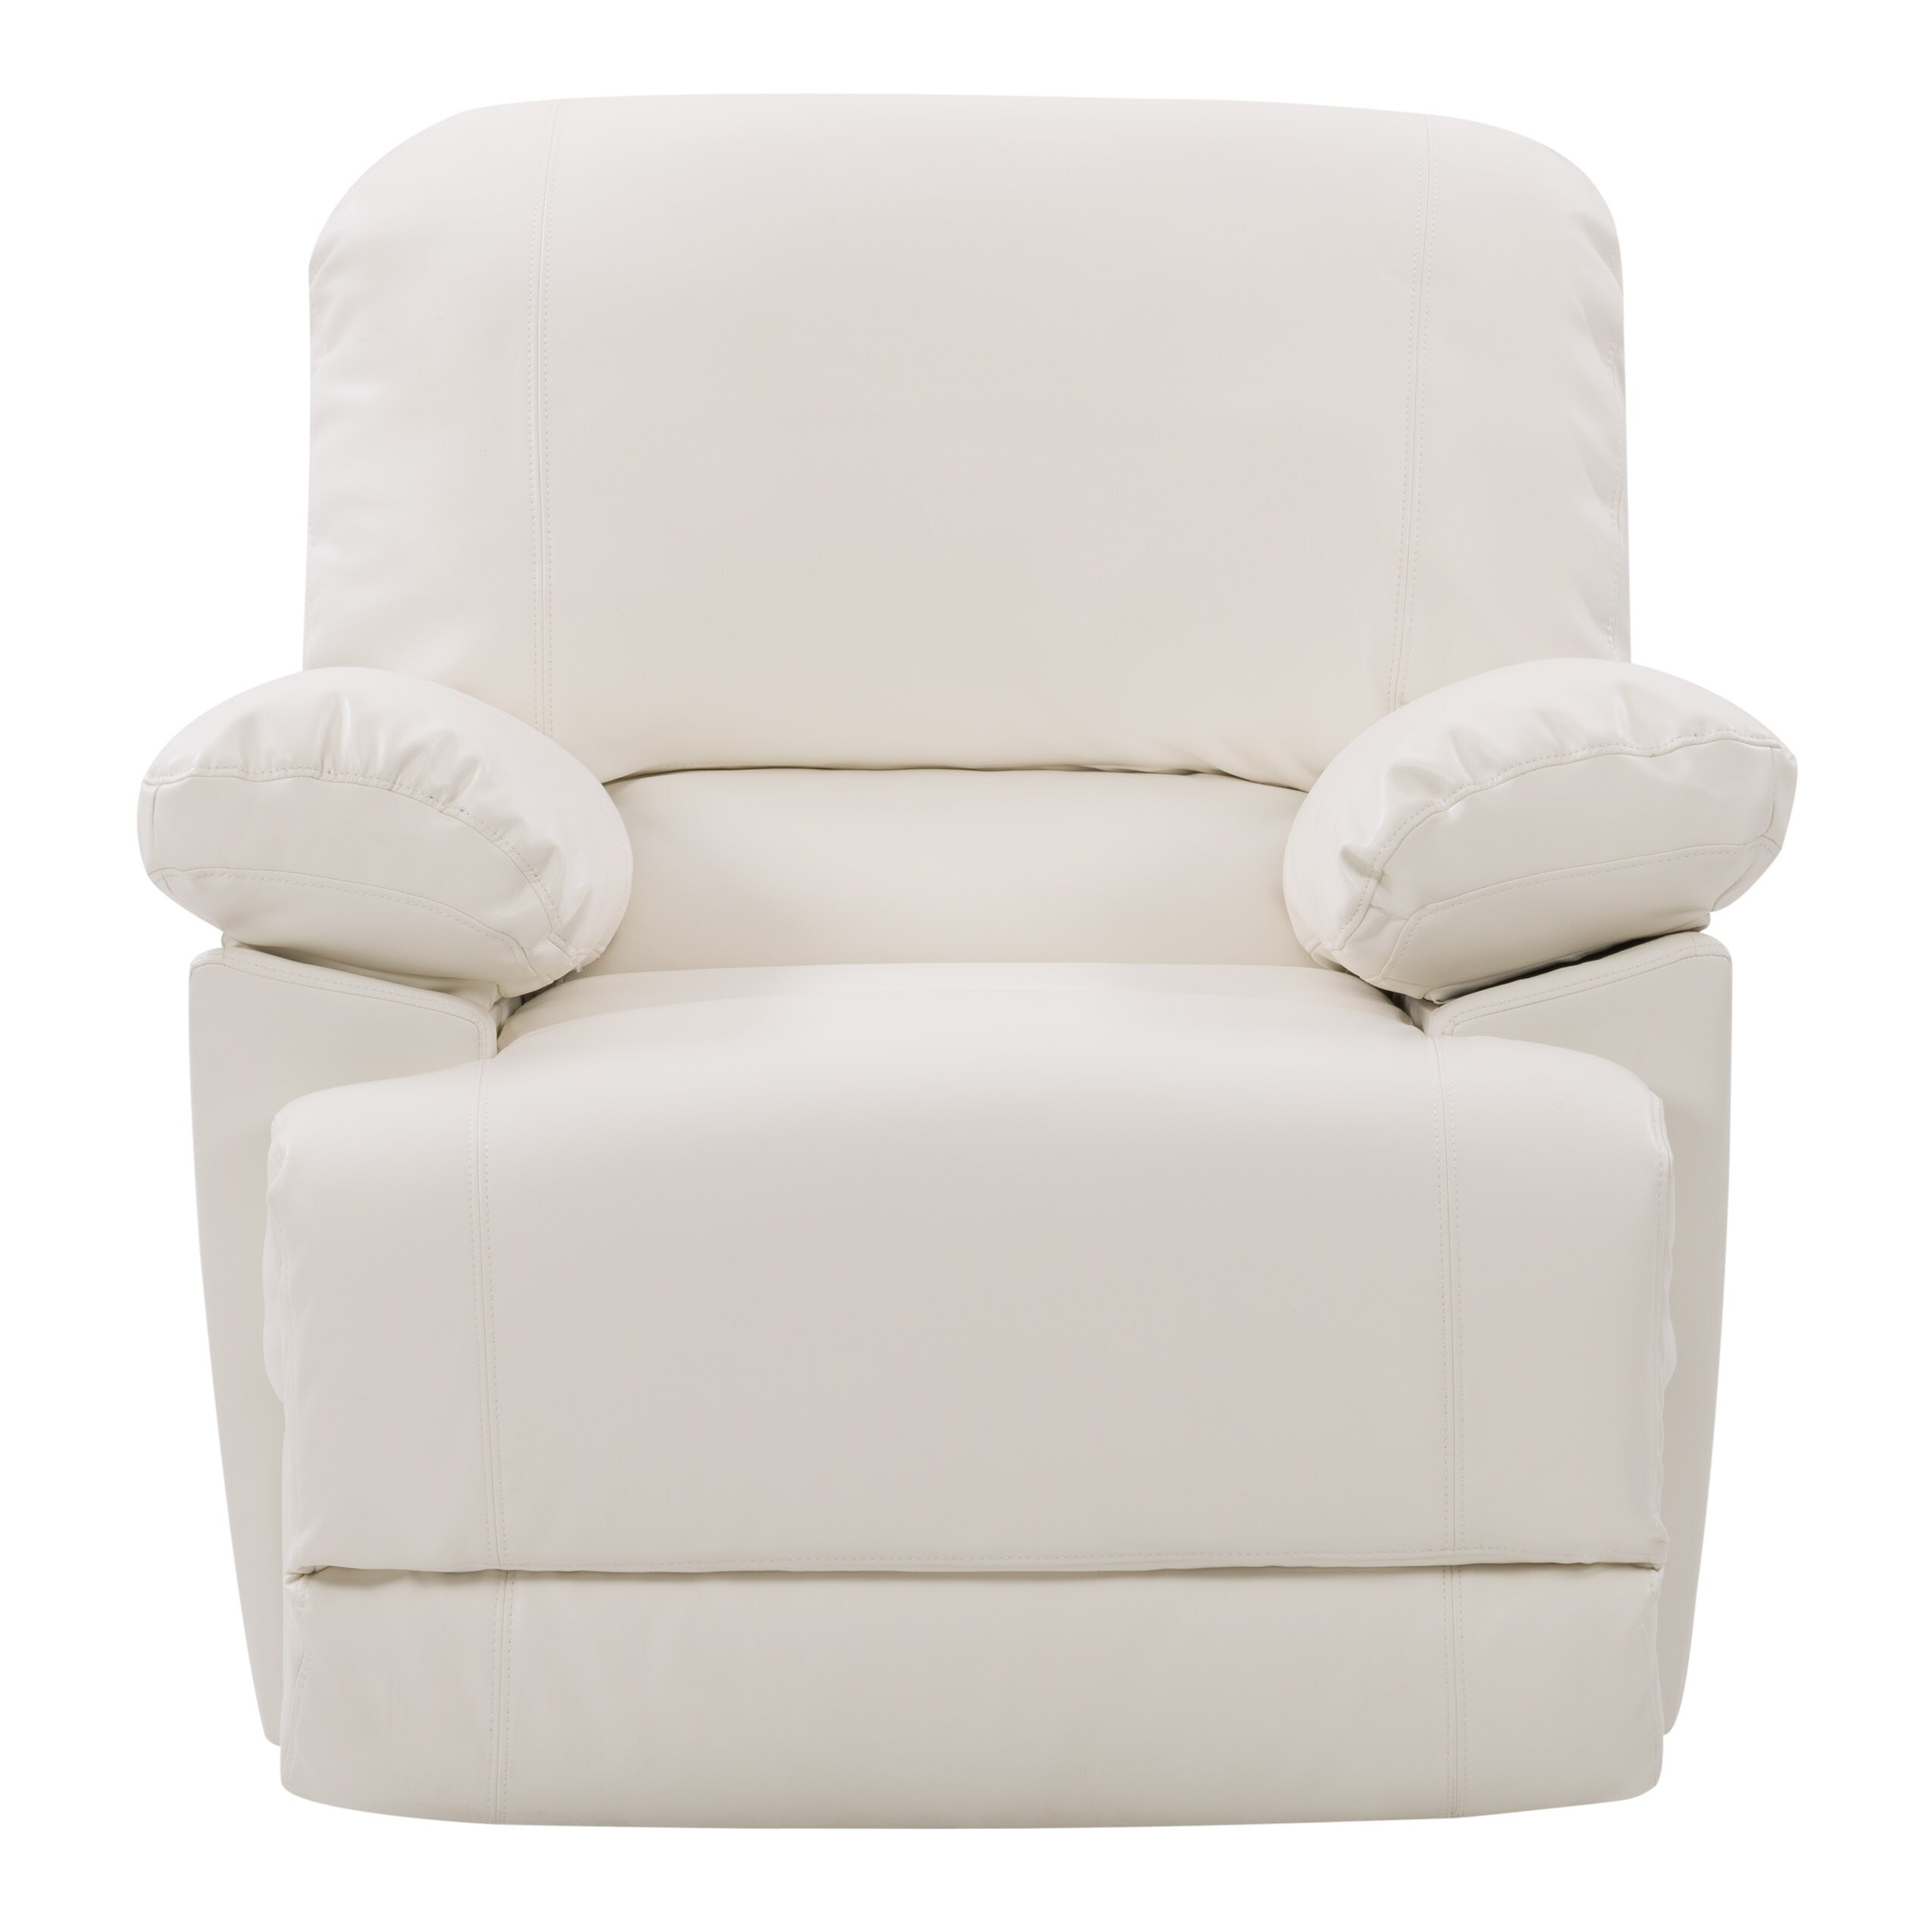 Lea White Bonded Leather Recliner, White Leather Recliners